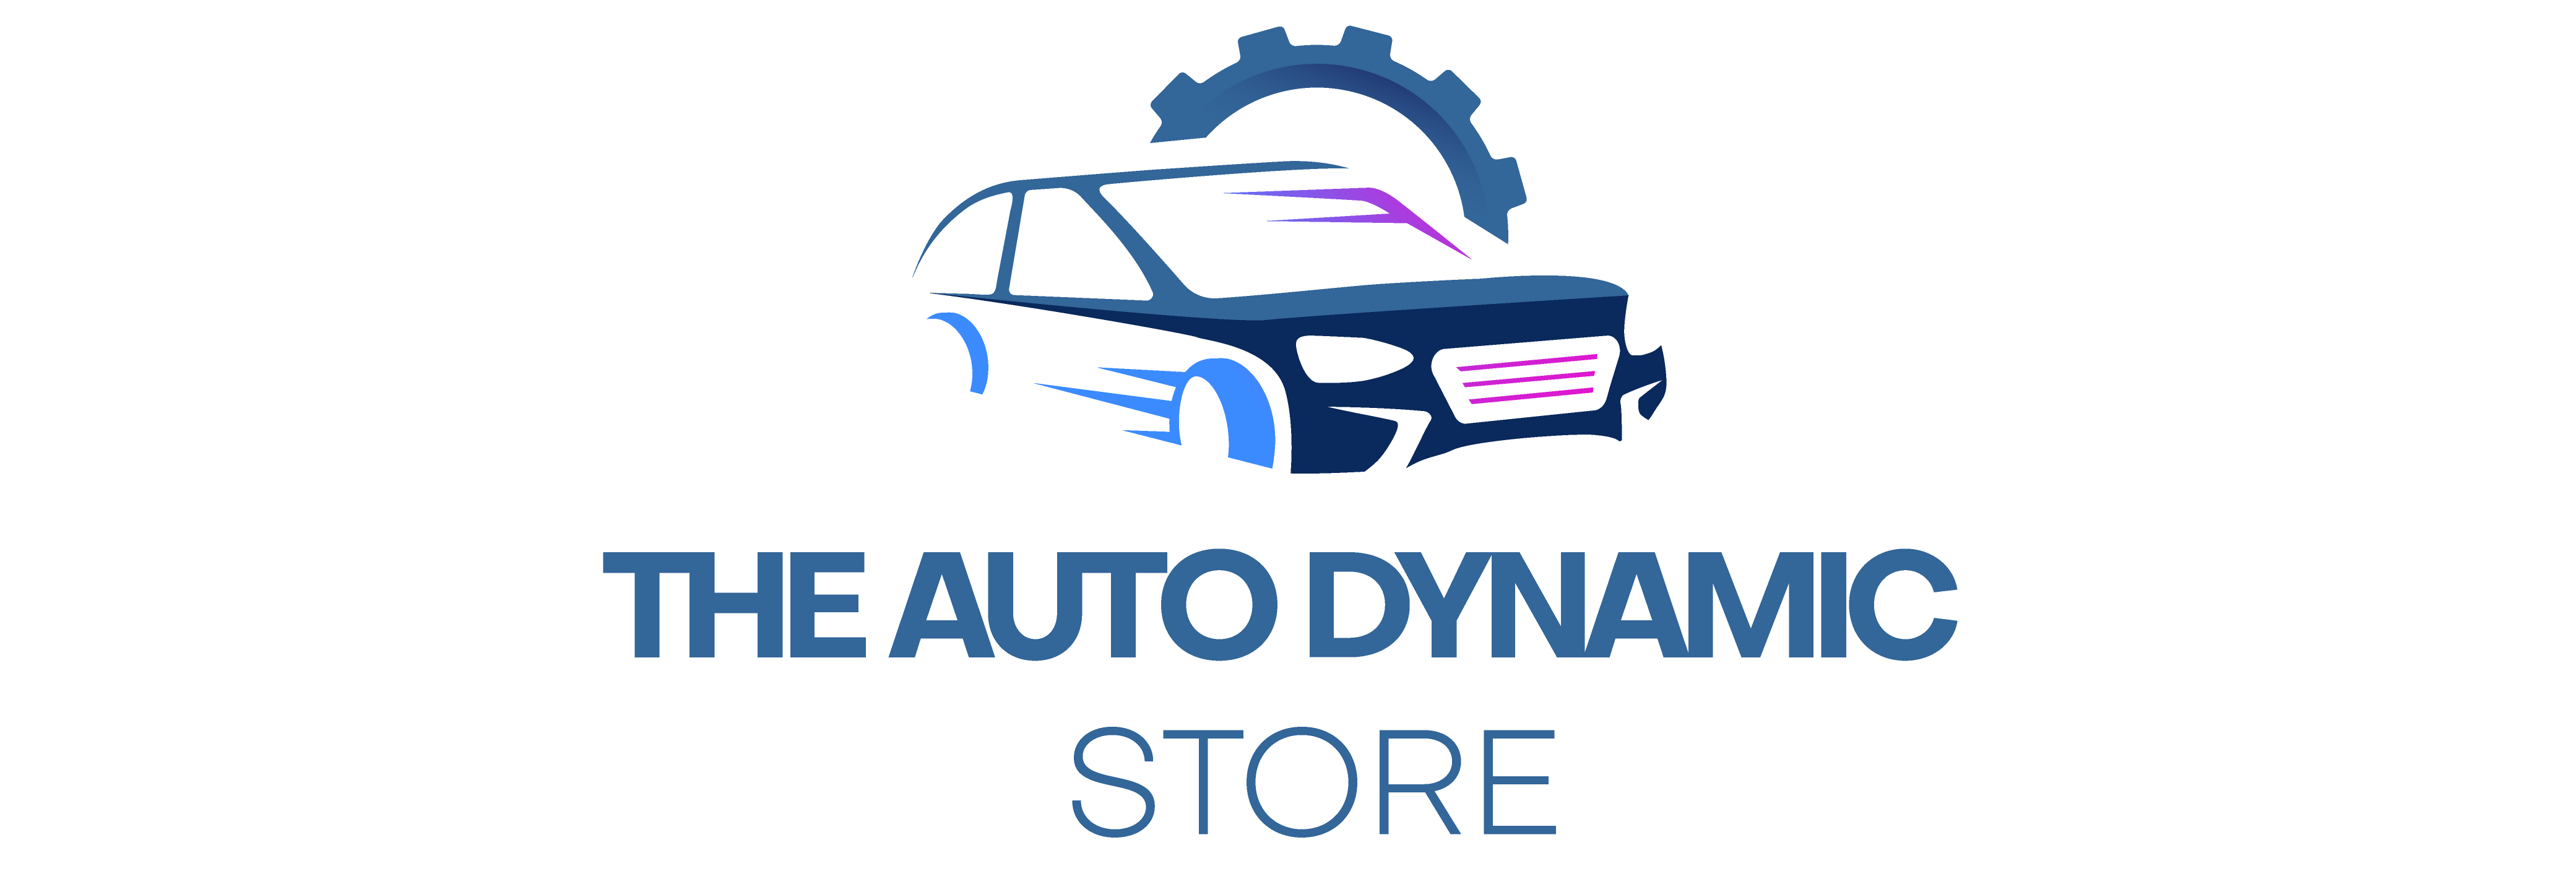 The Auto Dynamic Store